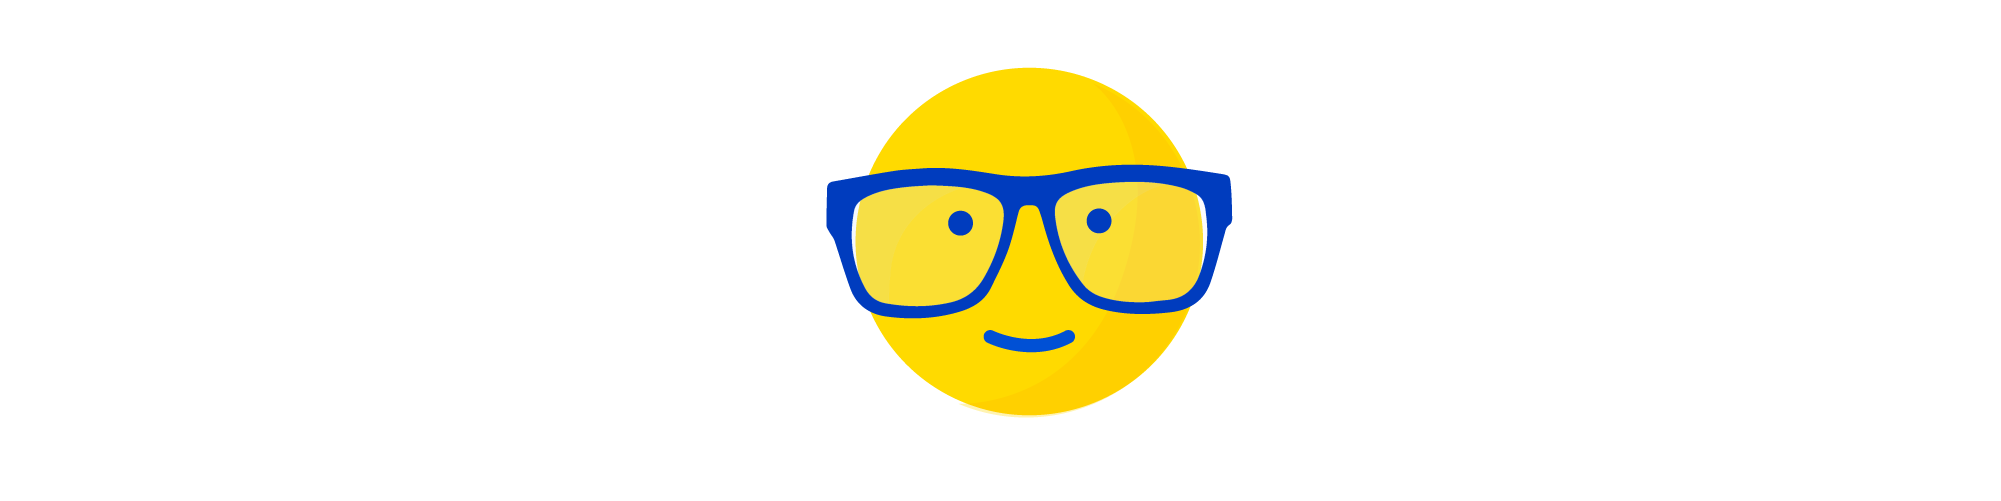 Illustrated icon of an emoji with glasses